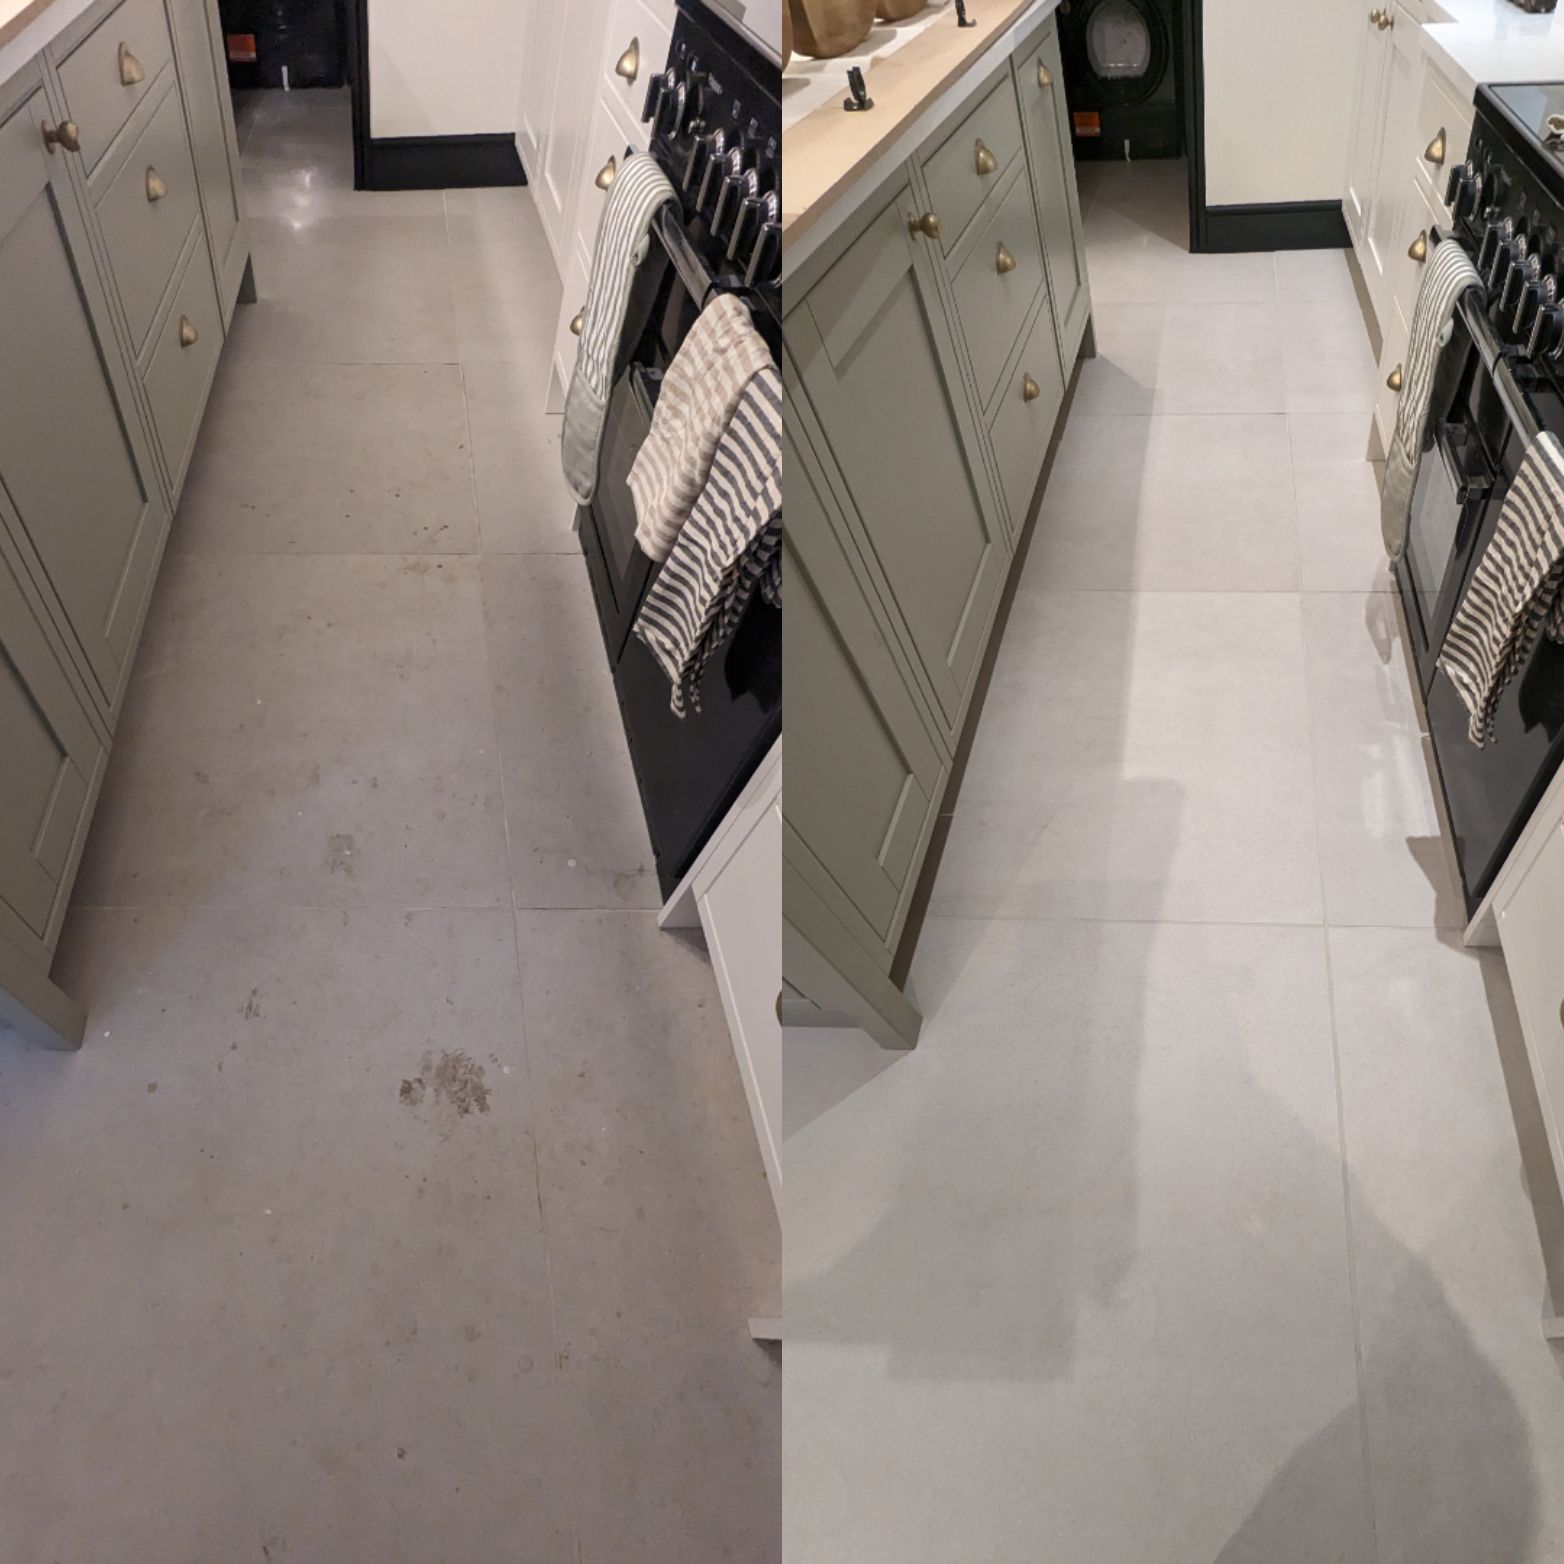 PORCELAIN TILES GROUT DEEP CLEANING AND SEALING IN WORSLEY, GREATER MANCHESTER BY QUALITY TILE CARE